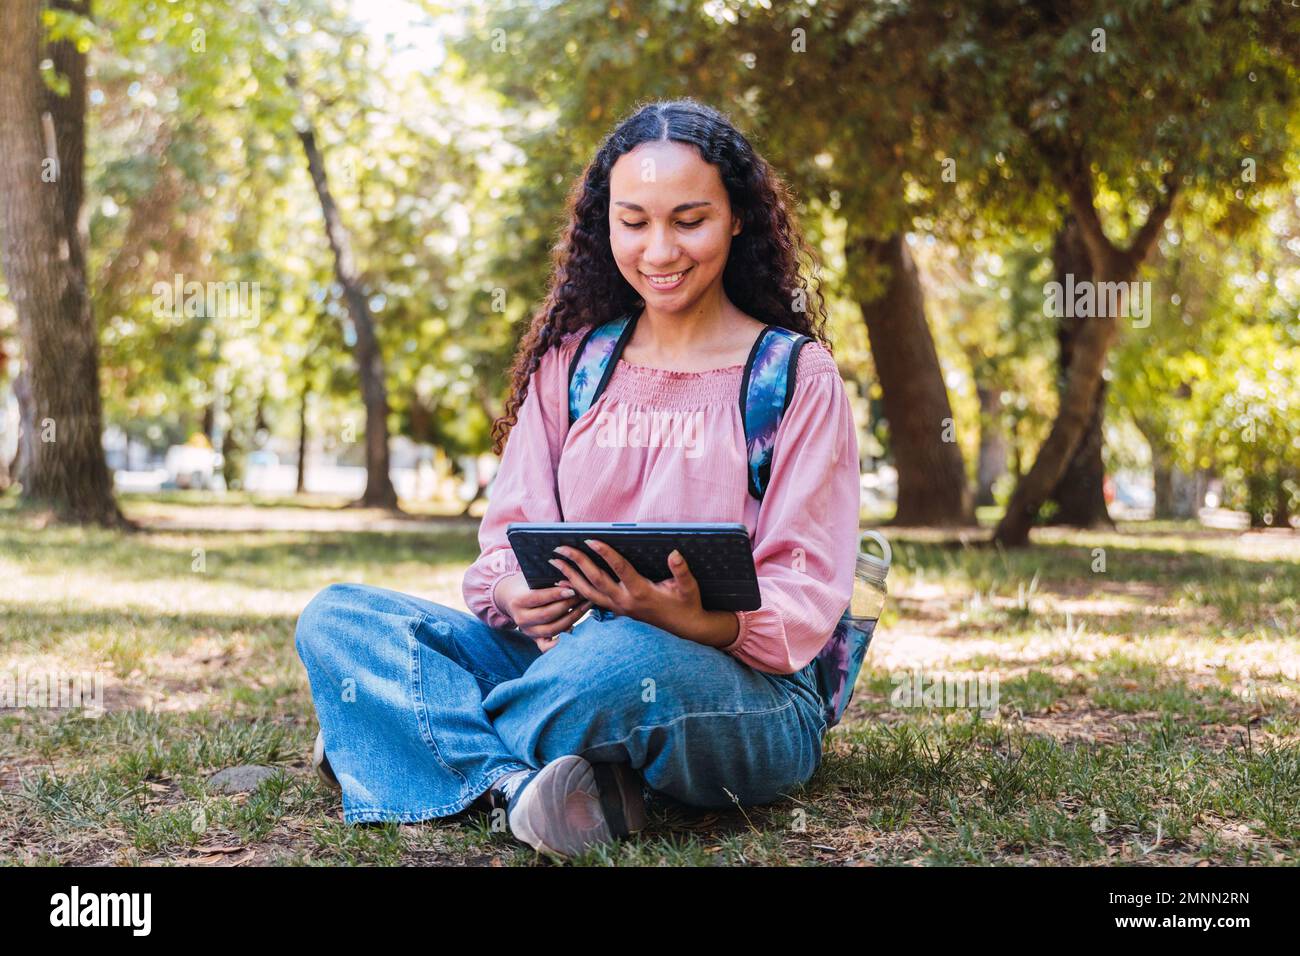 Latin university student woman smiling and using a tablet sitting outside in a park on the grass Stock Photo